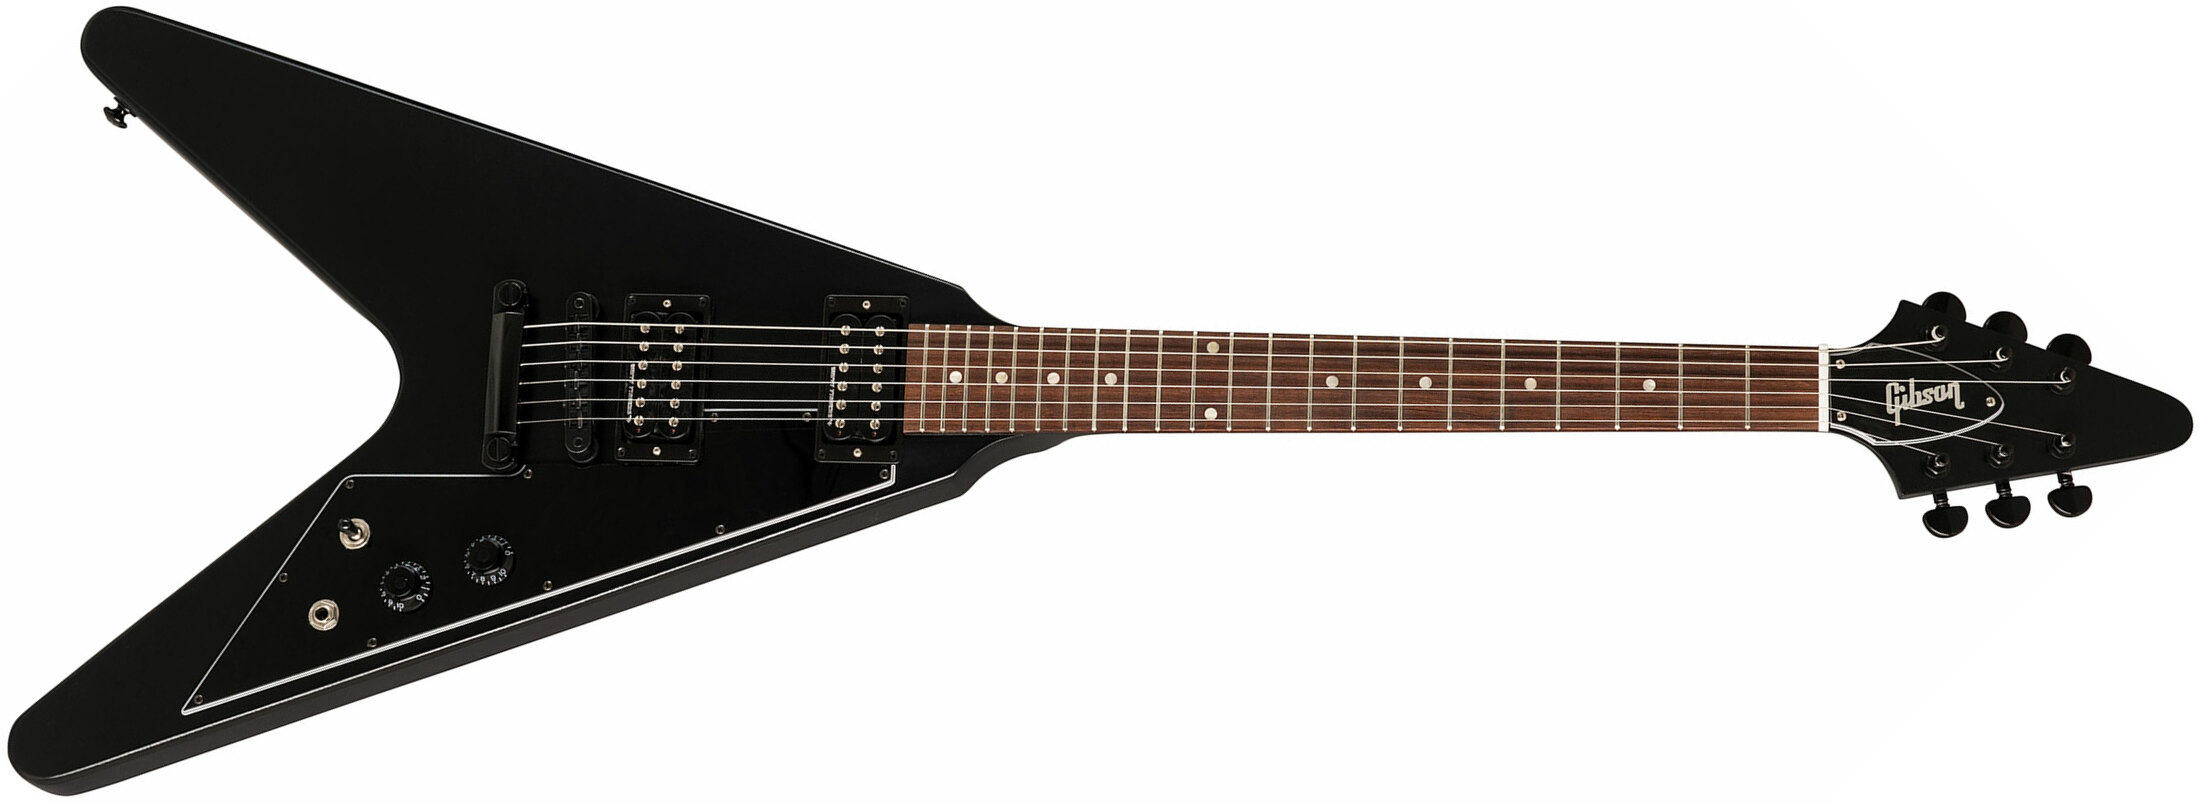 Gibson Flying V Tribute 2019 Hh Ht Rw - Satin Ebony - Guitarra electrica metalica - Main picture